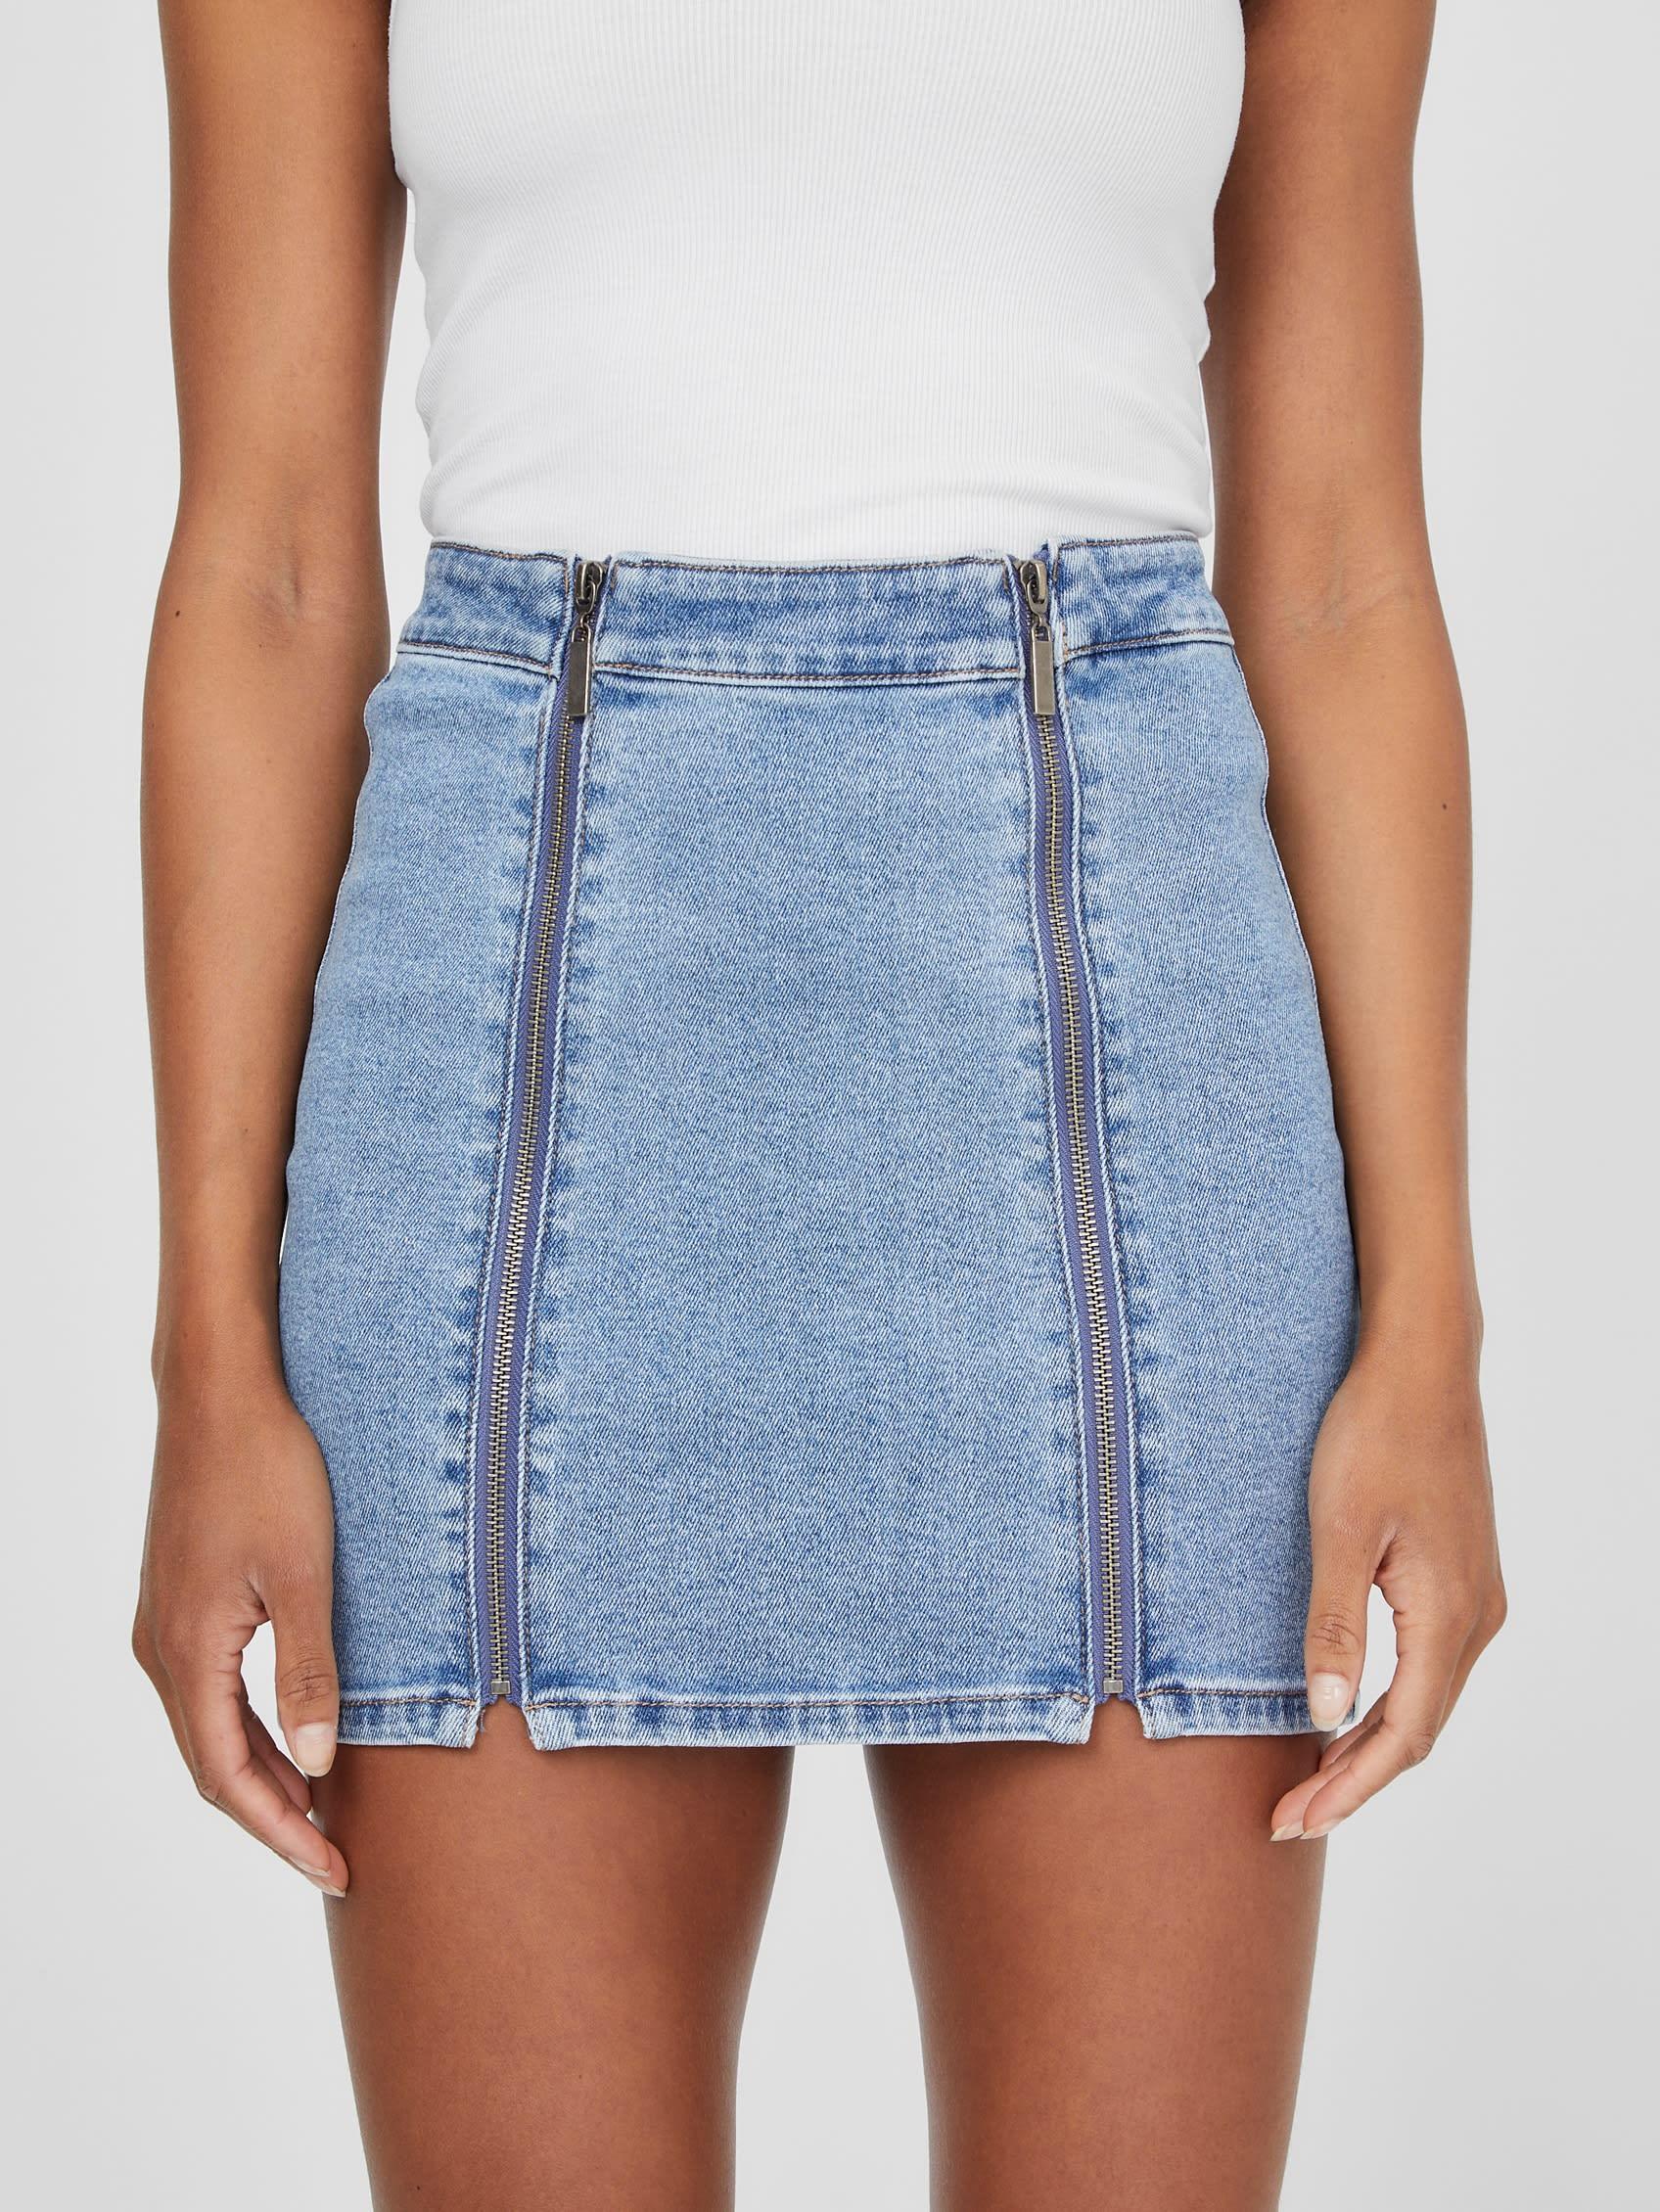 Buy Blue Skirts for Women by Deal Jeans Online | Ajio.com